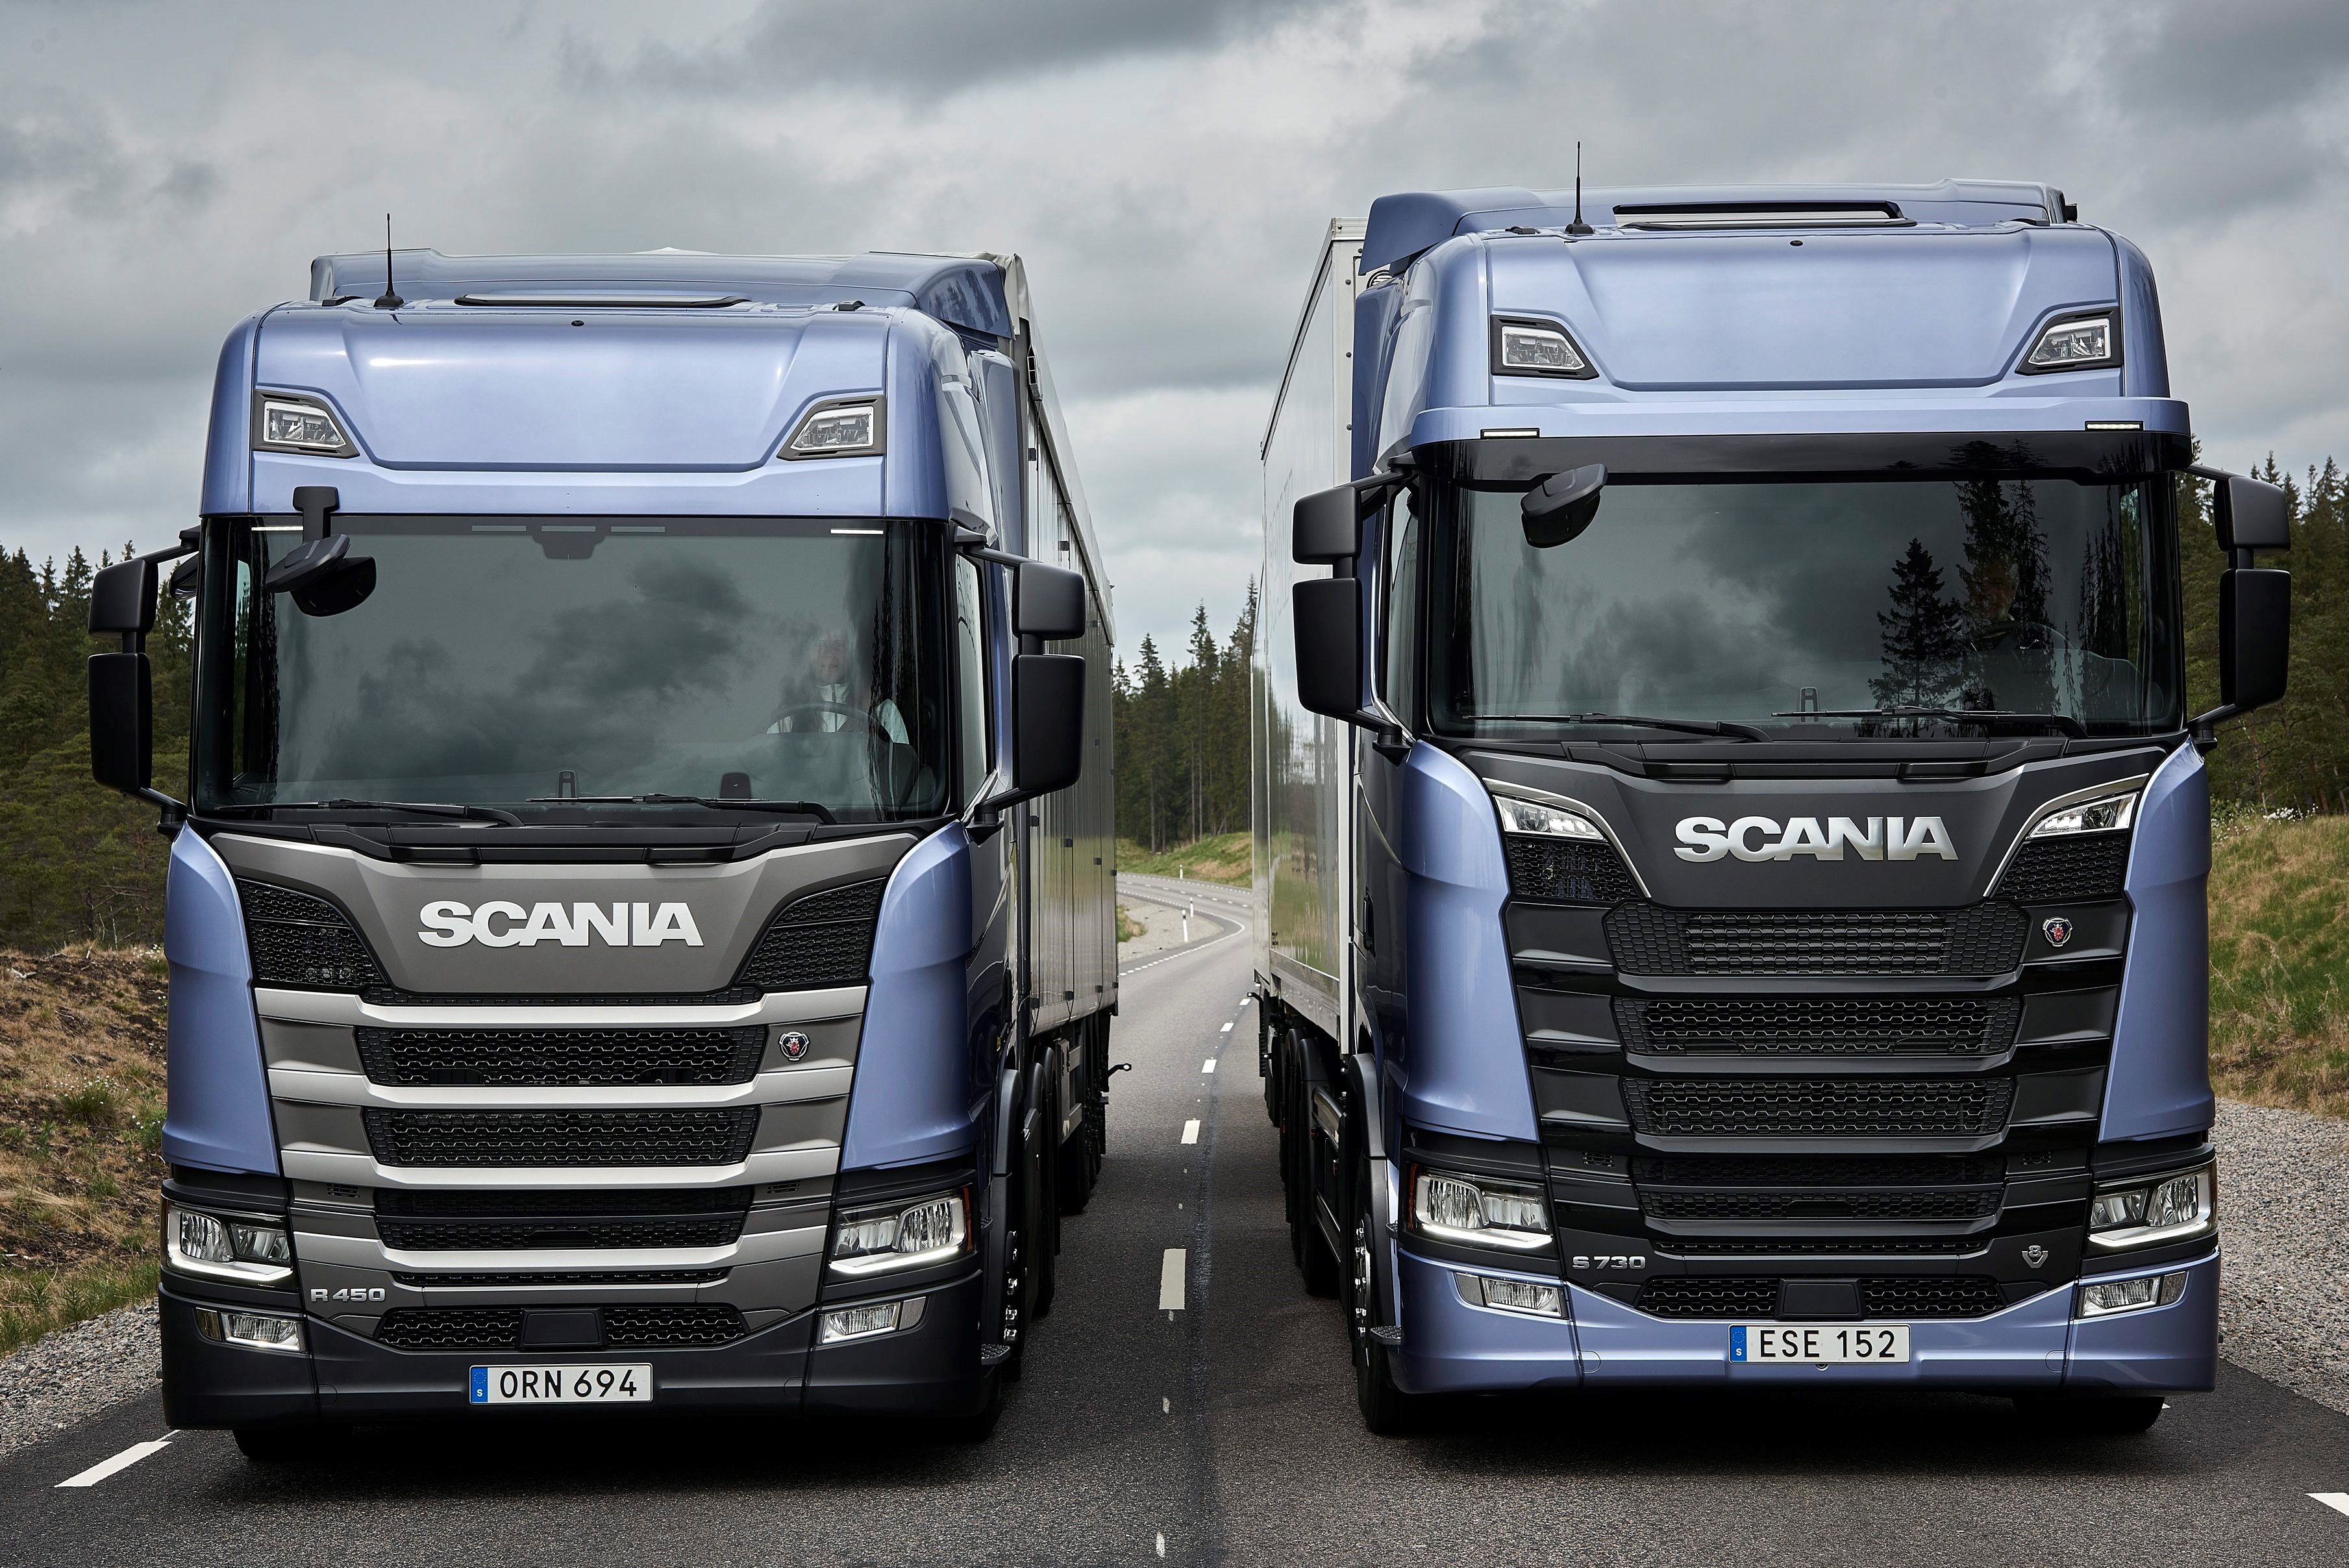 Scania S730 HD Gallery. Truck Wallpaper Photo Pics image